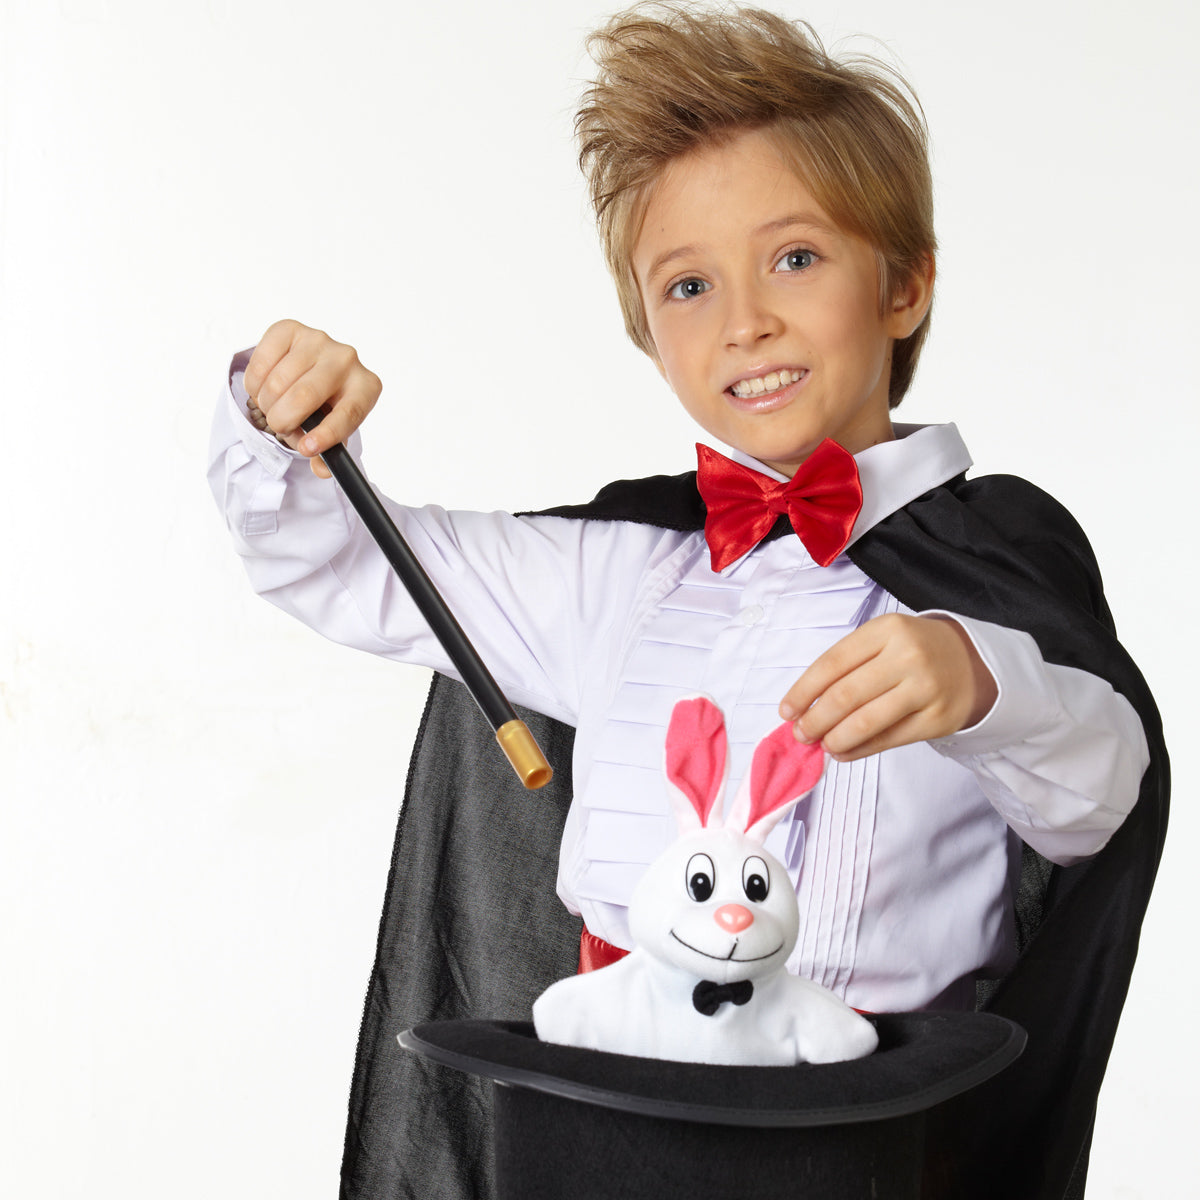 Kid pulling bunny out of a hat